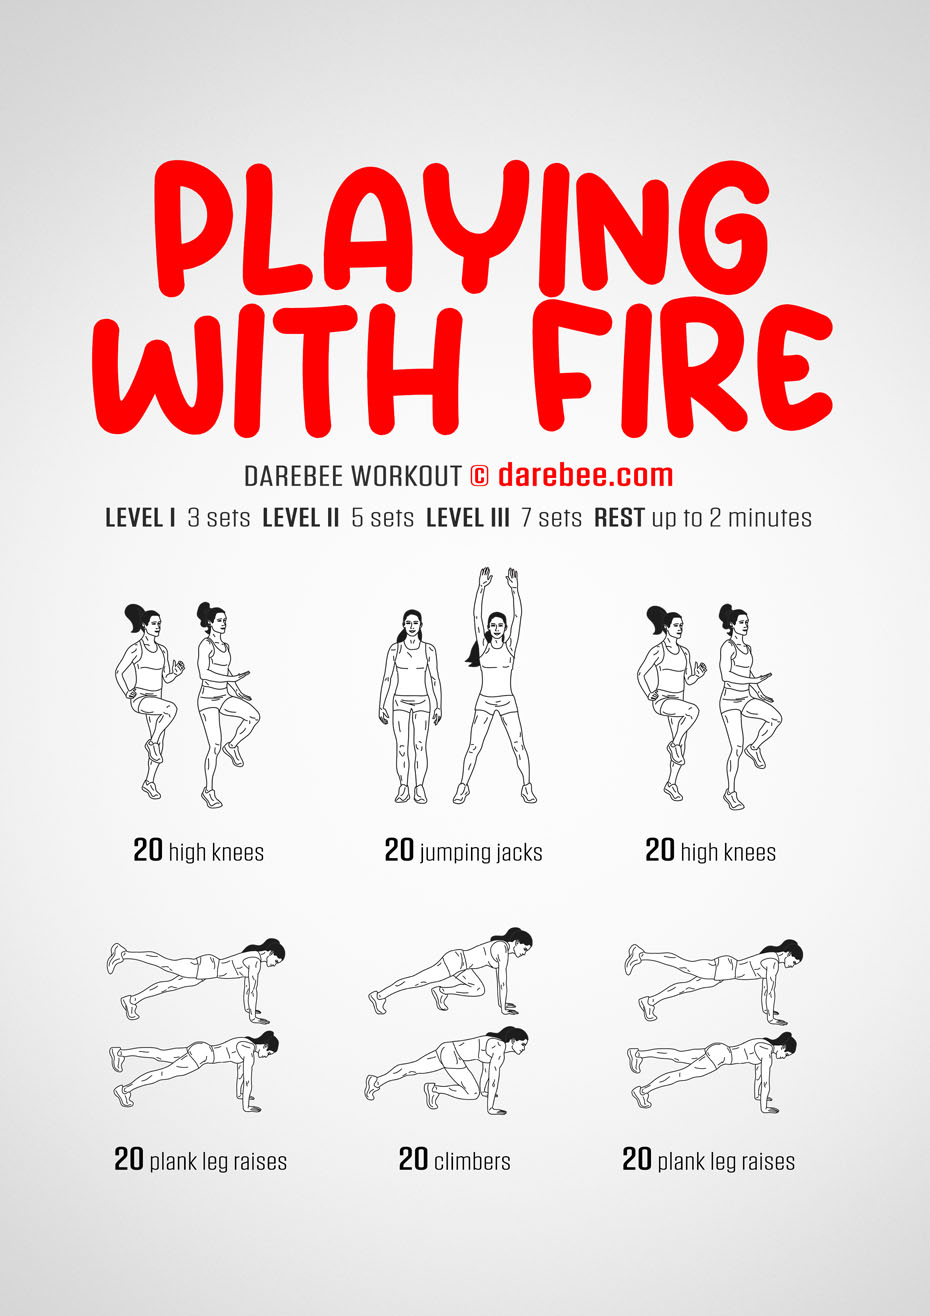 Playing With Fire is a Darebee no-equipment home strength training workout.